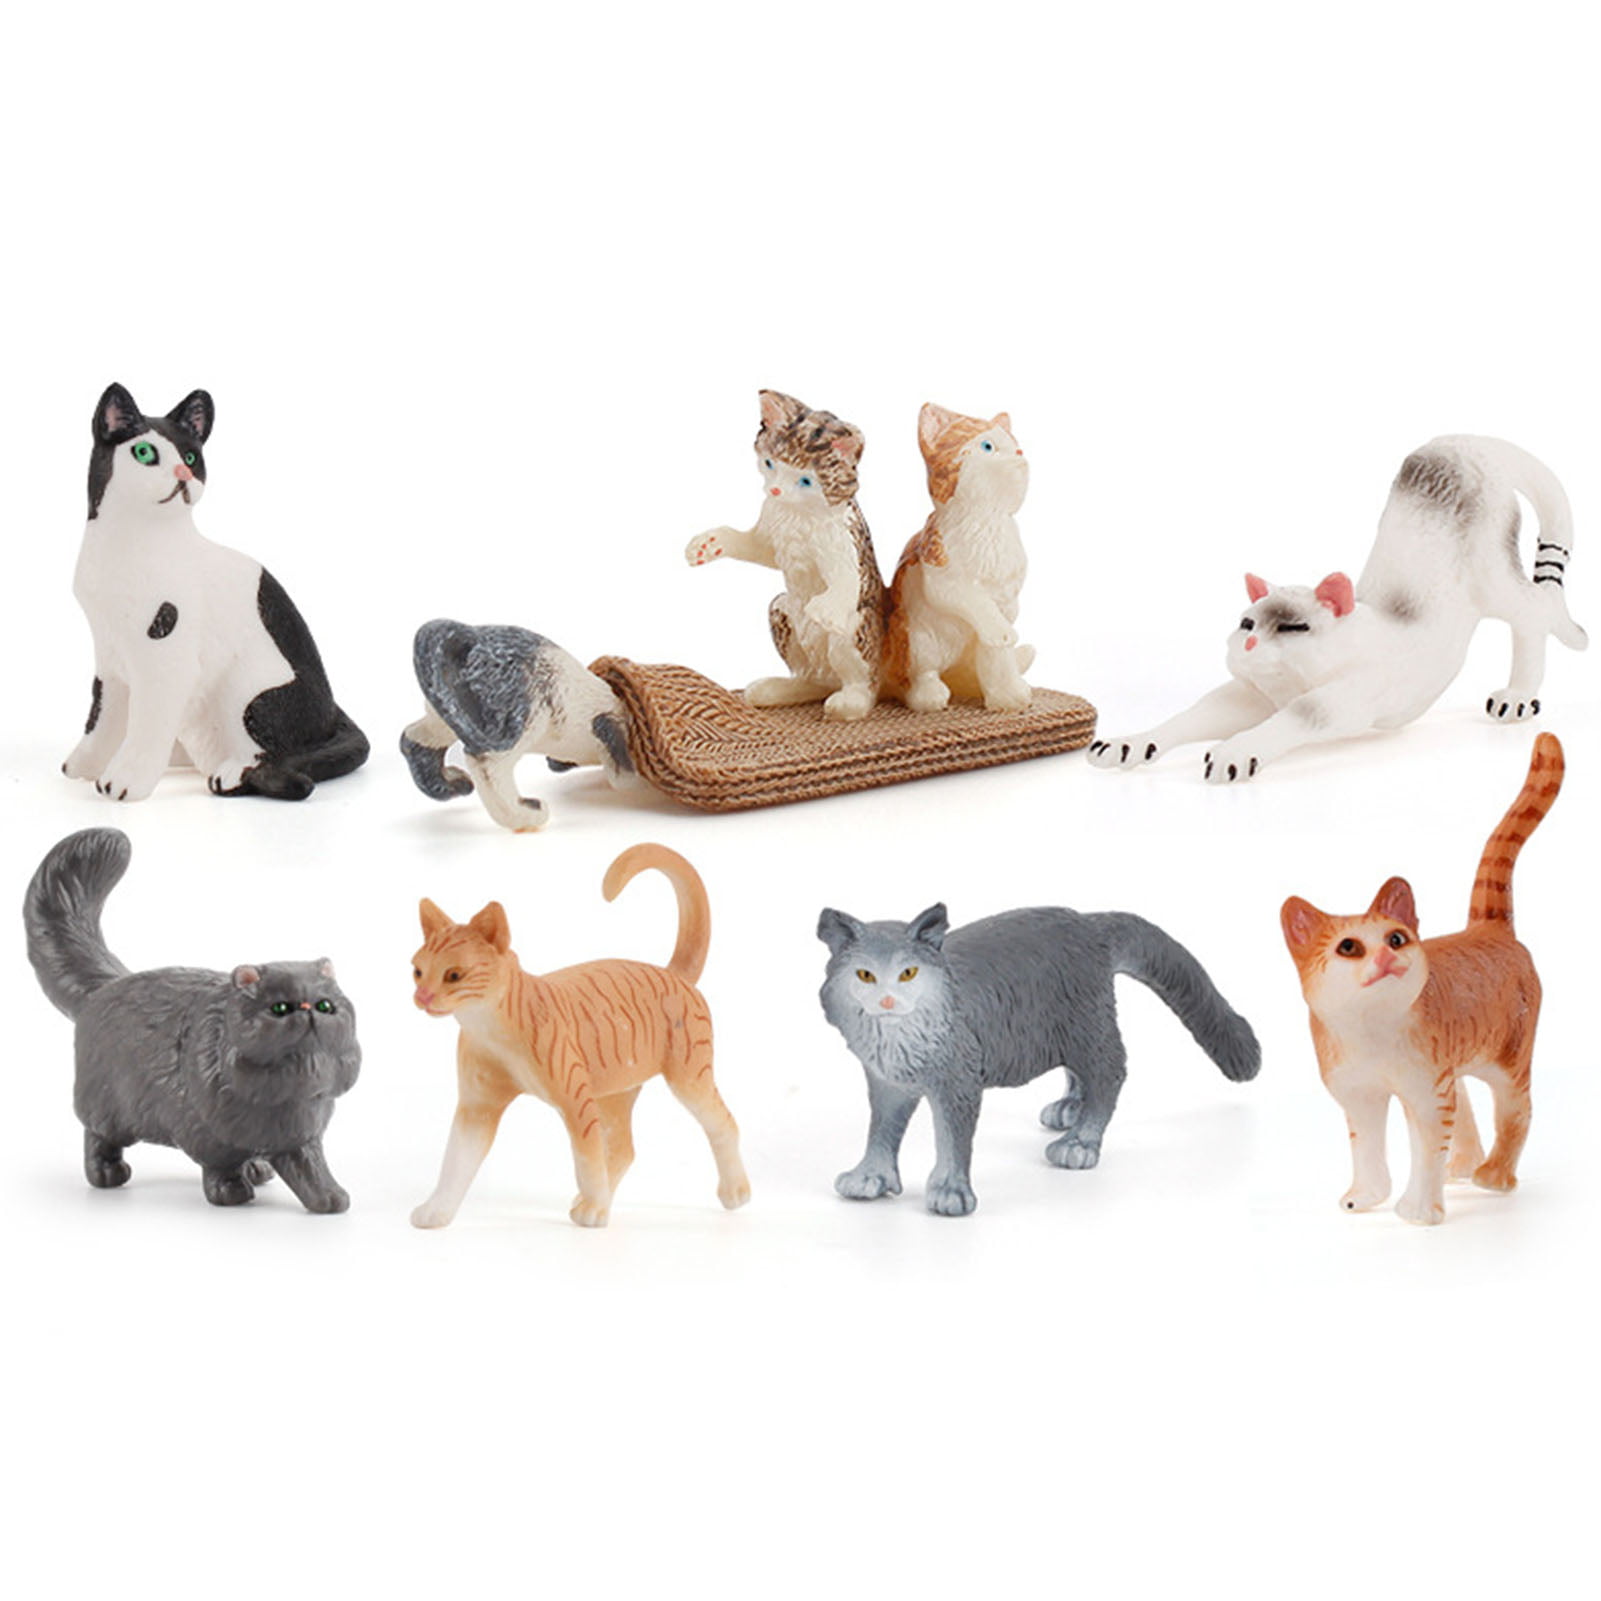 12 Mini plastic Cats 5 cm Animals! Small Party bag toys Educational 